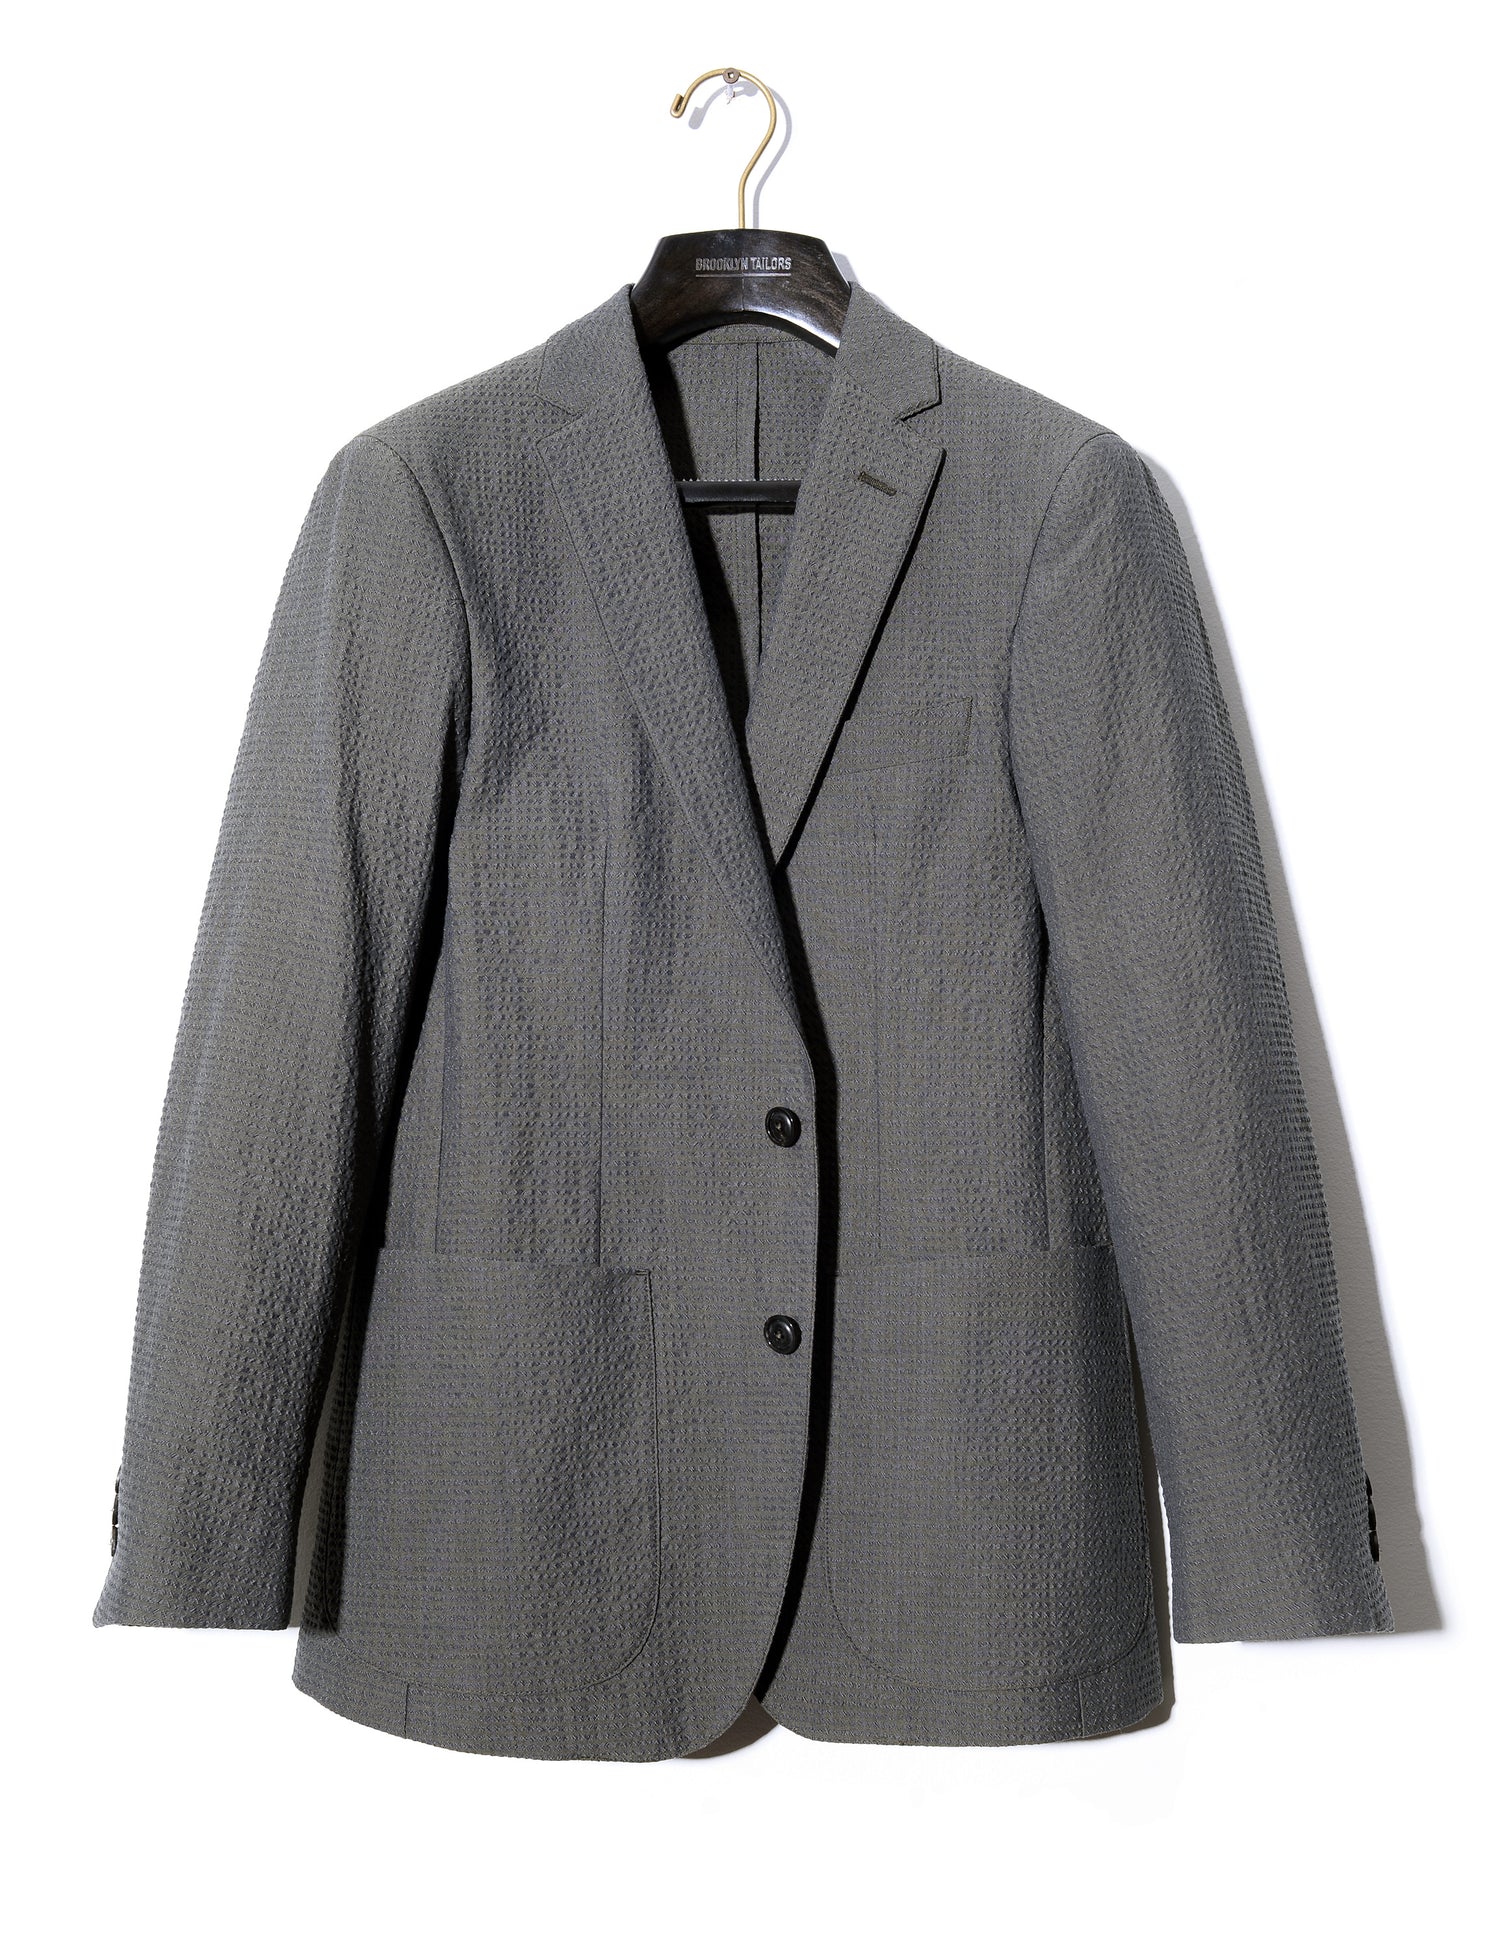 Brooklyn Tailors BKT35 Unstructured Jacket in Crinkled Wool & Cotton - Storm full length shot on hanger